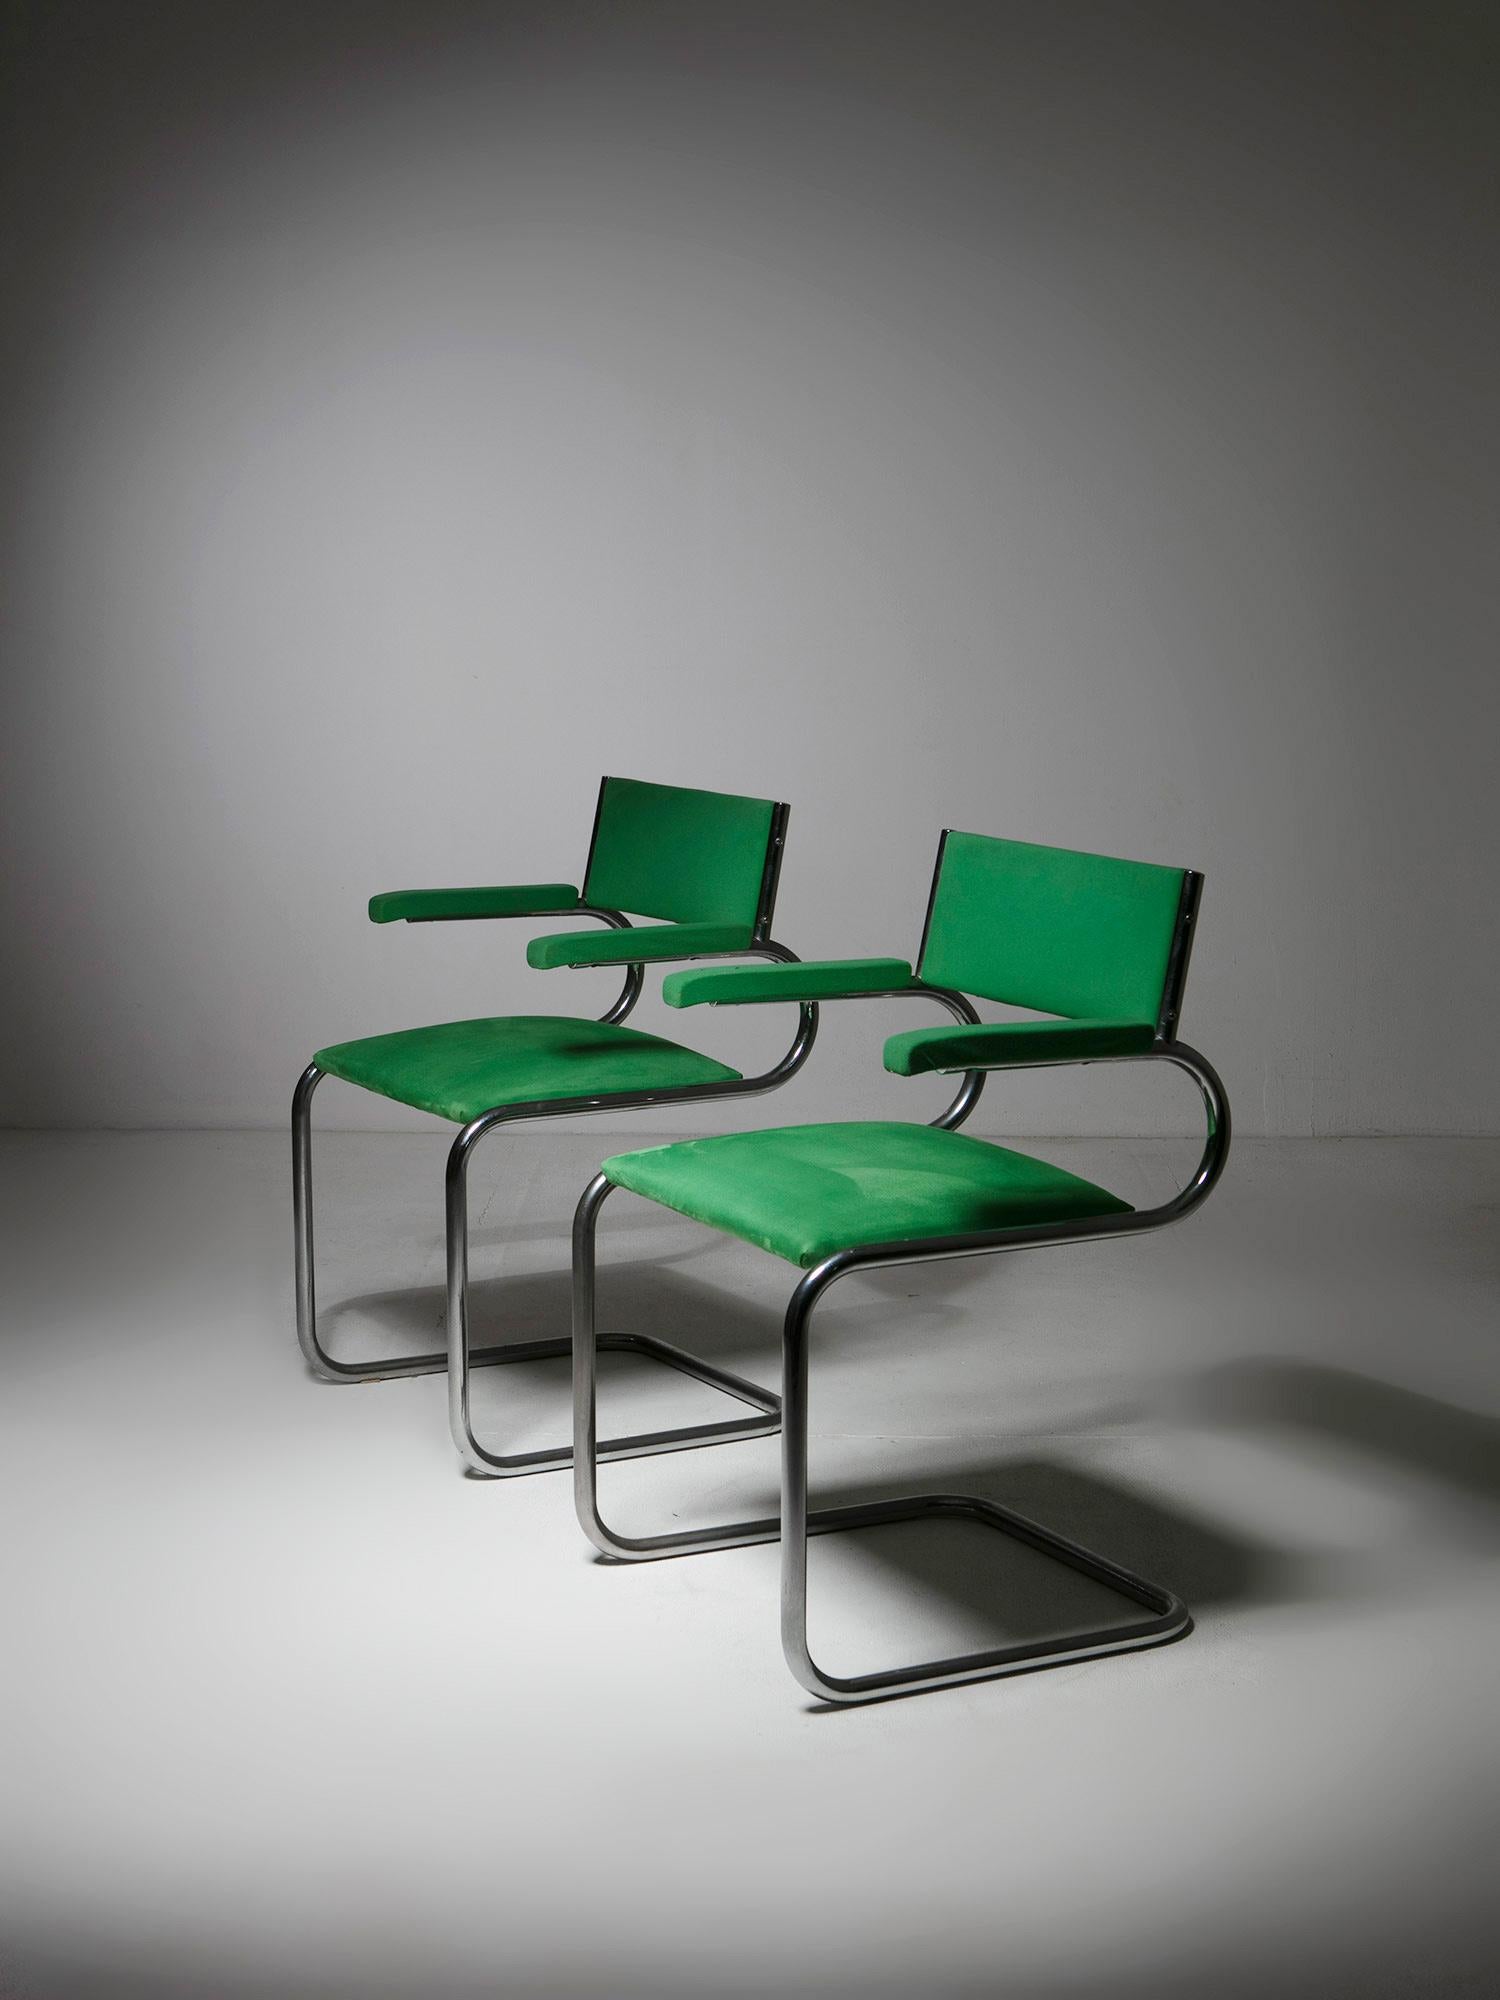 Set of two armchairs by Luigi Saccardo for Arrmet.
Green velvet covered chairs with an iconic tubular shape.